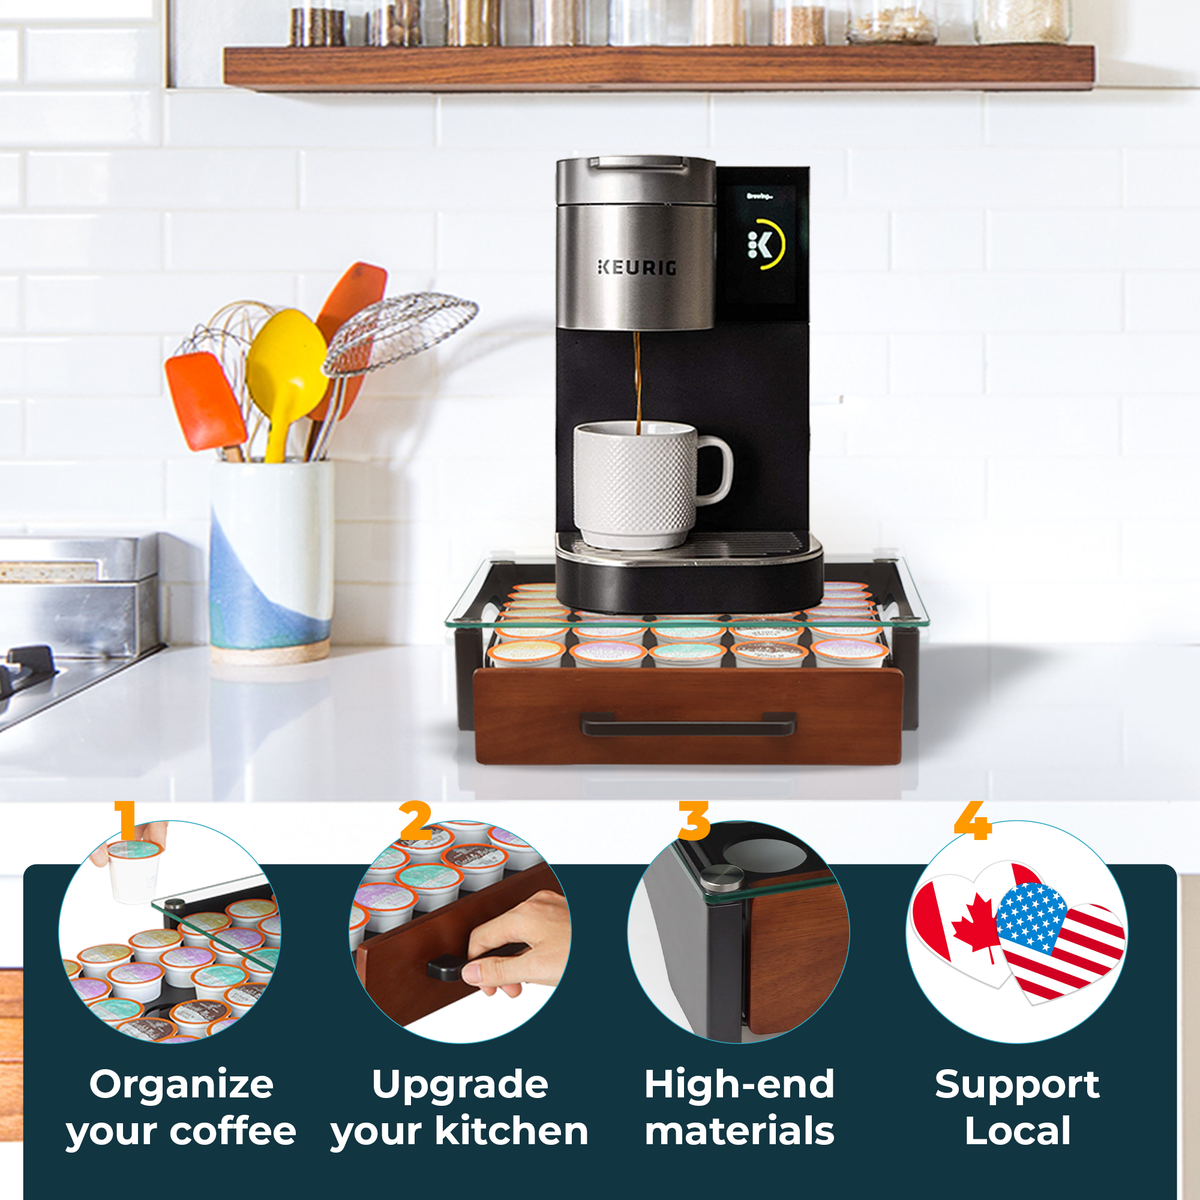 Where & How to Store Coffee K-Cups (In Any Kitchen Layout!) - The